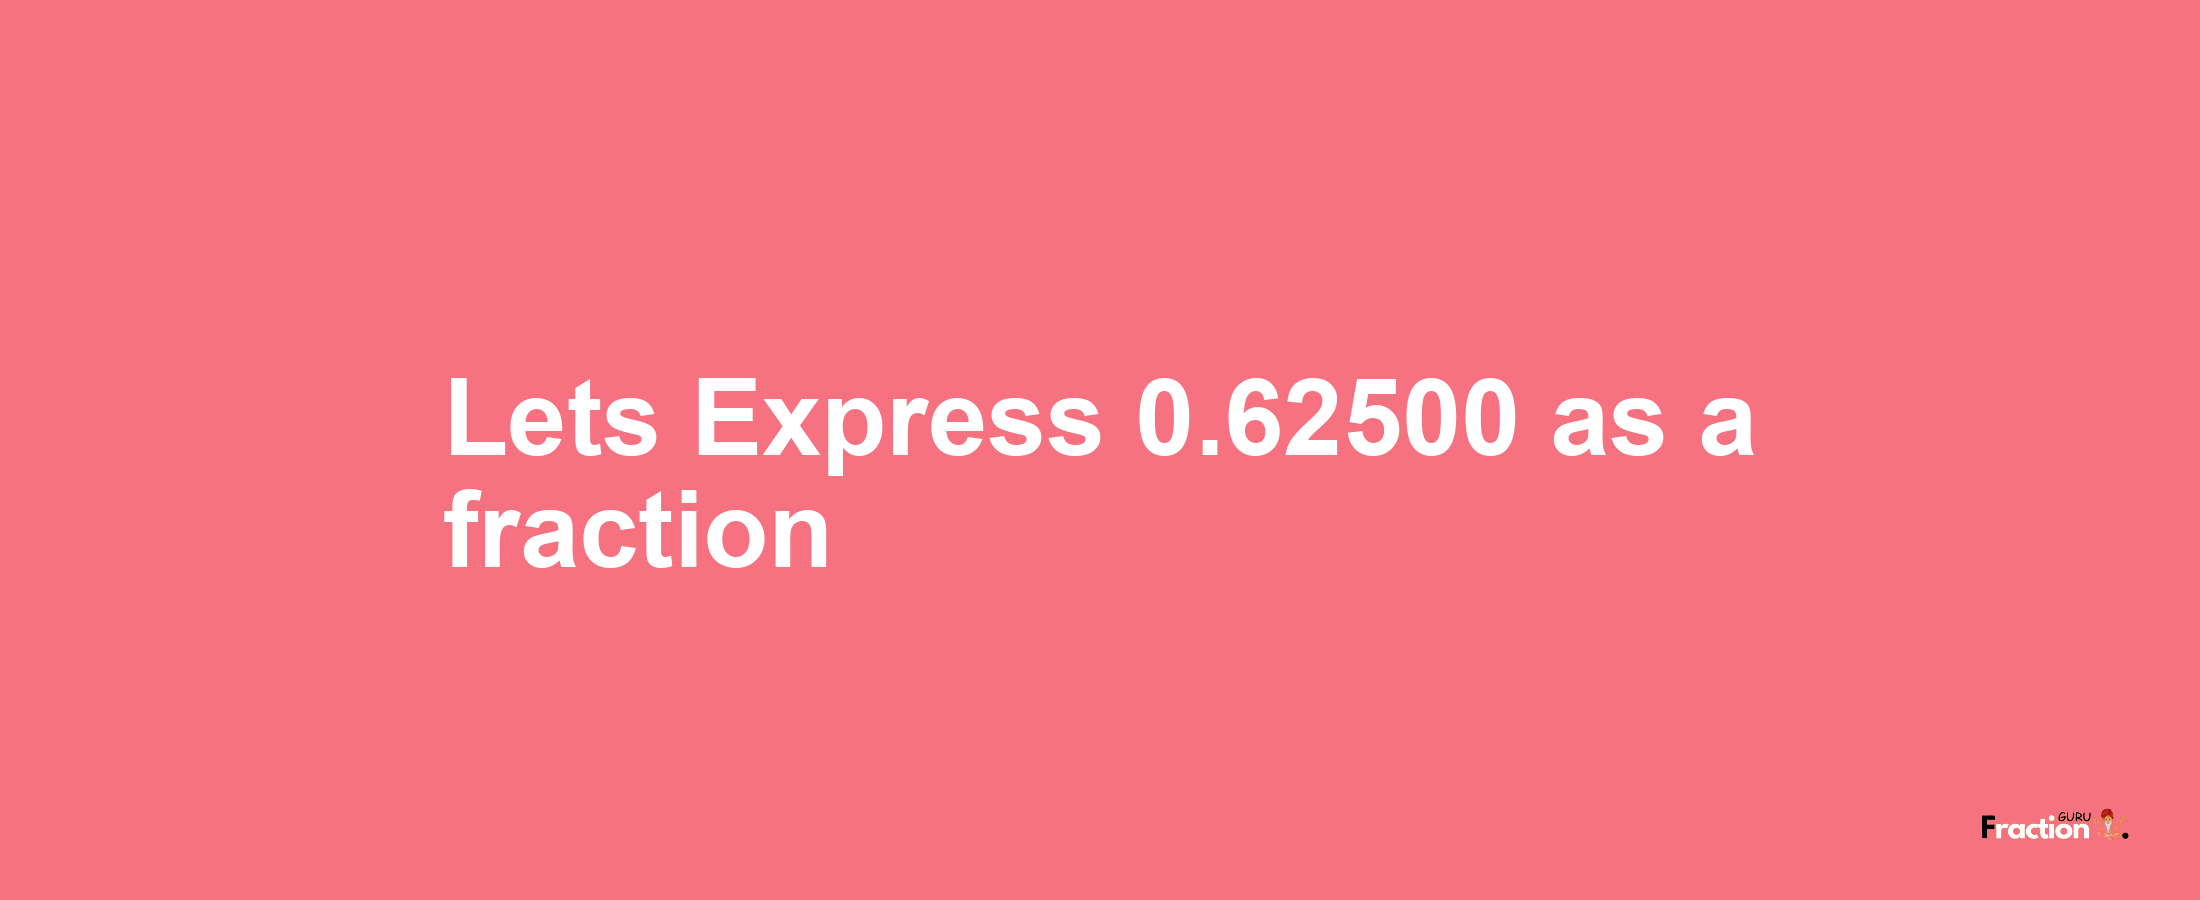 Lets Express 0.62500 as afraction